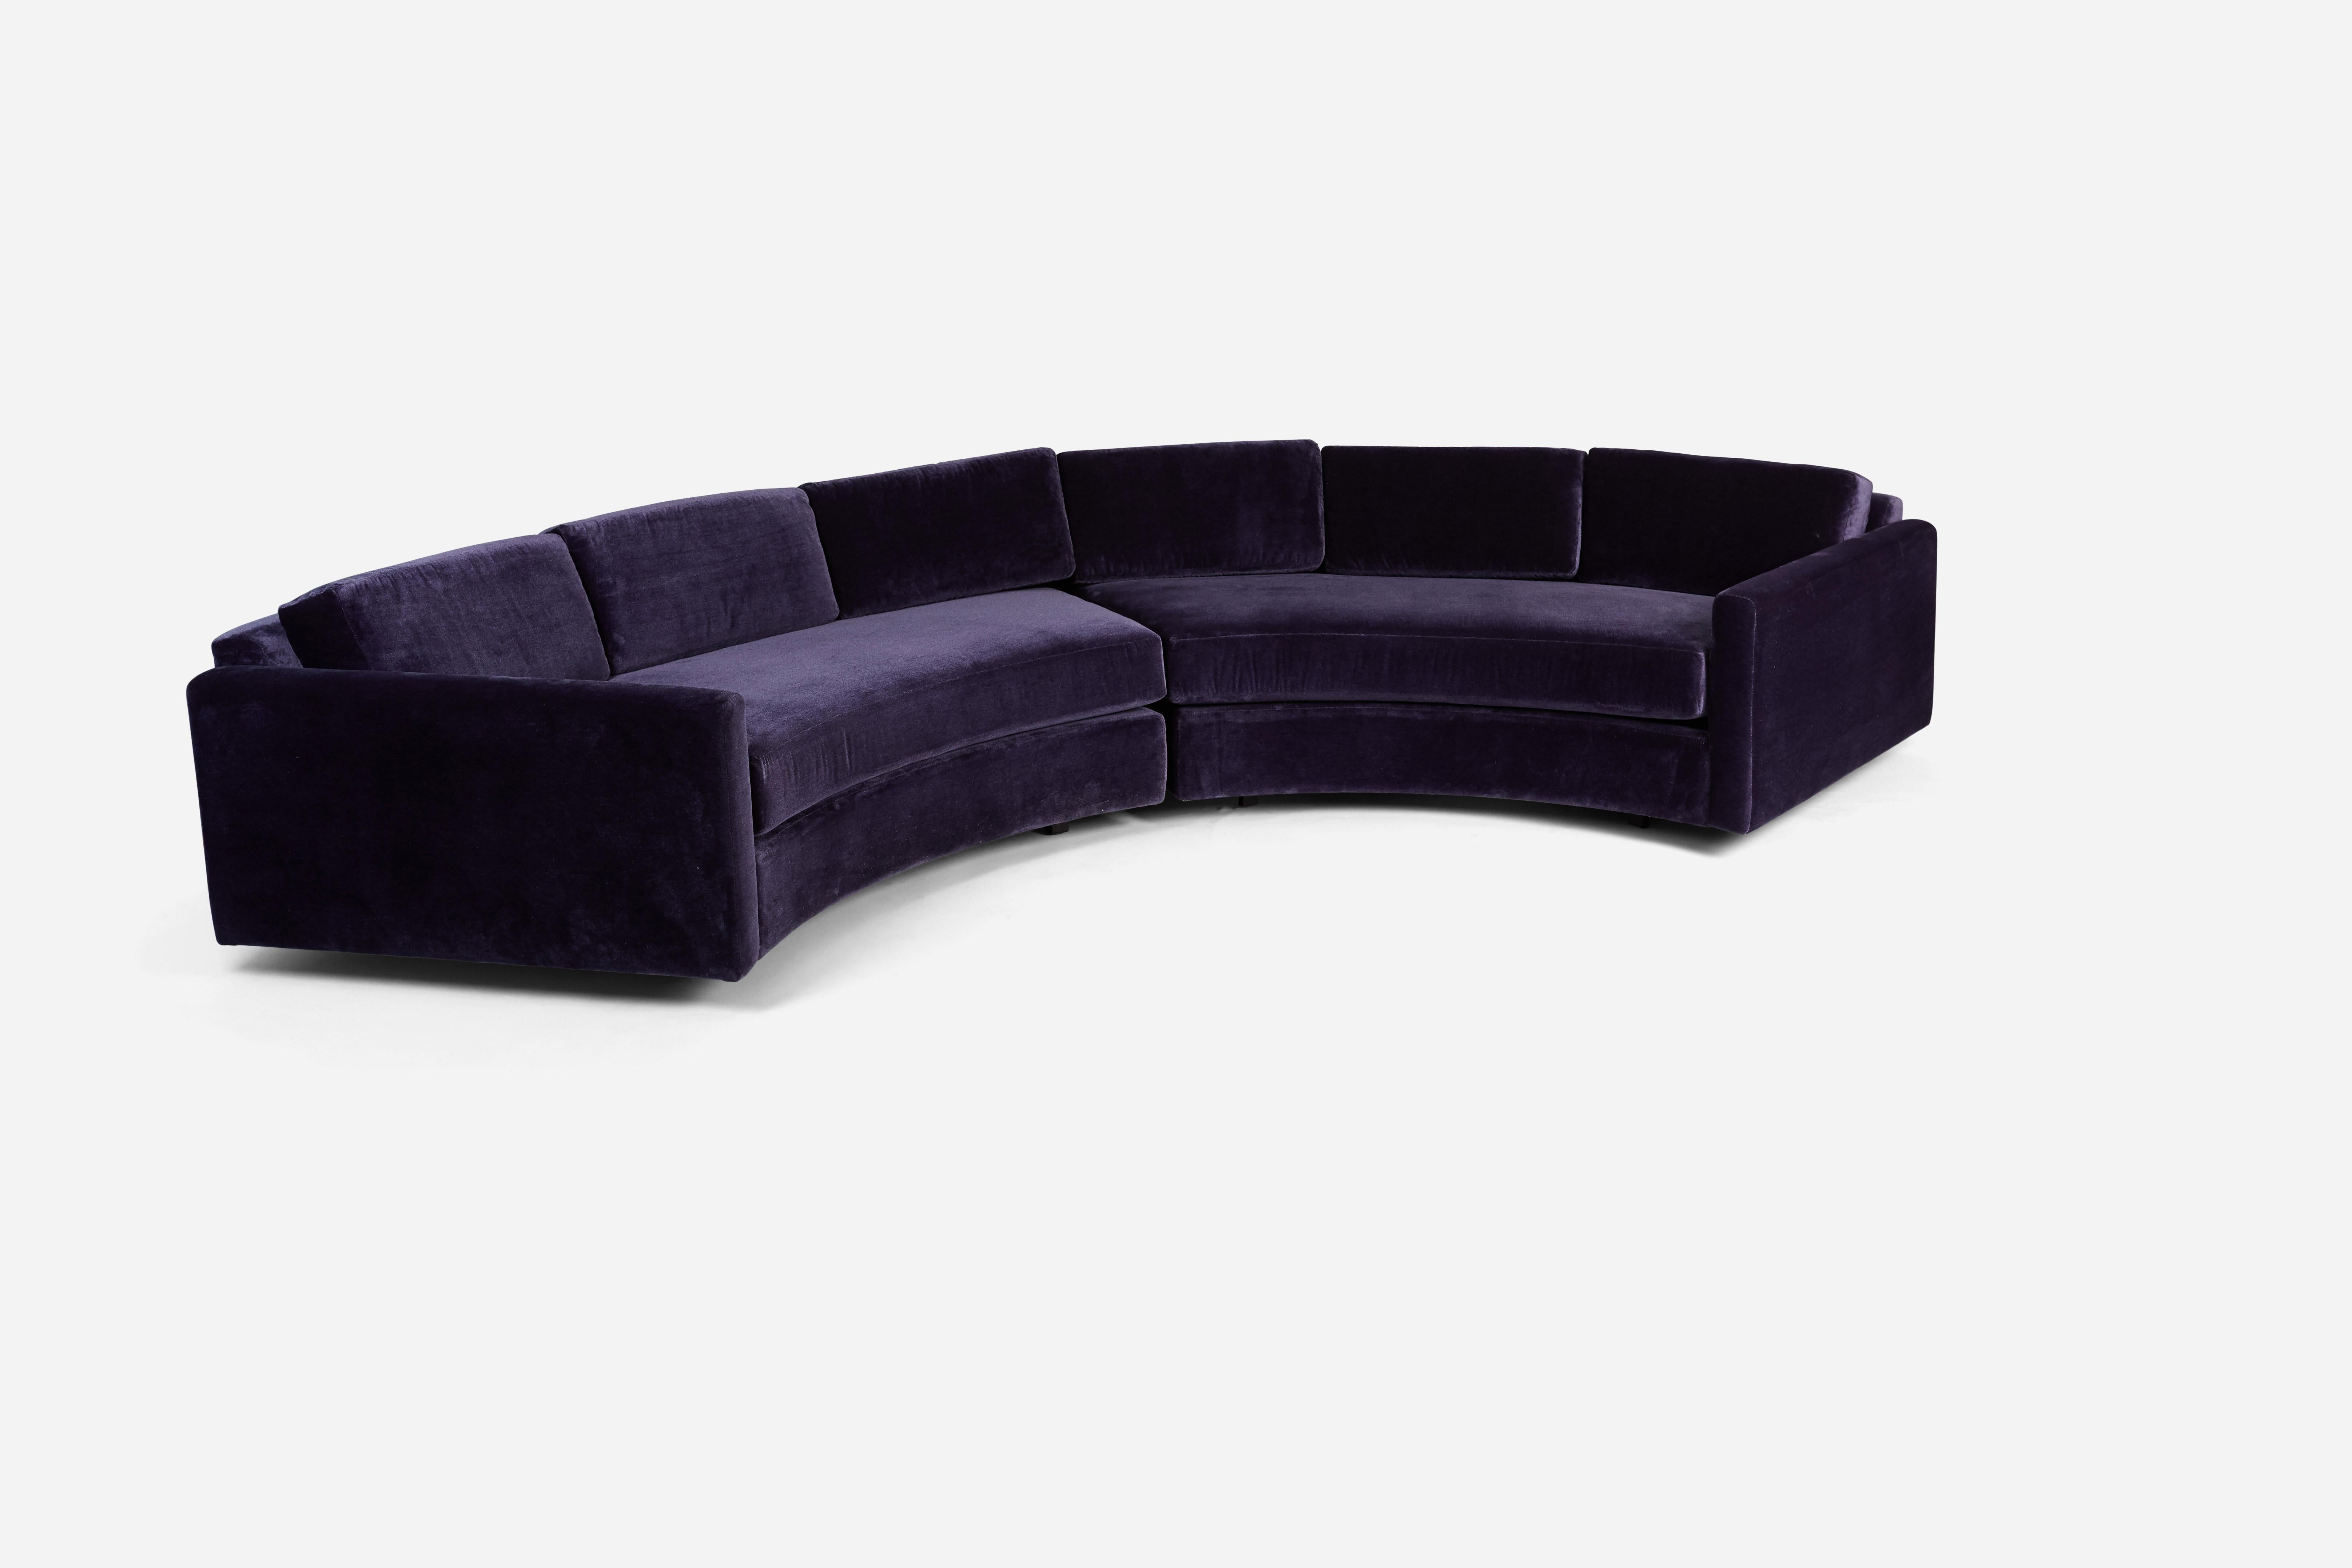 Rounded semi-circle sofa by Adrian Pearsall. Fully restored and reupholstered in silk velvet. 2-piece sectional.